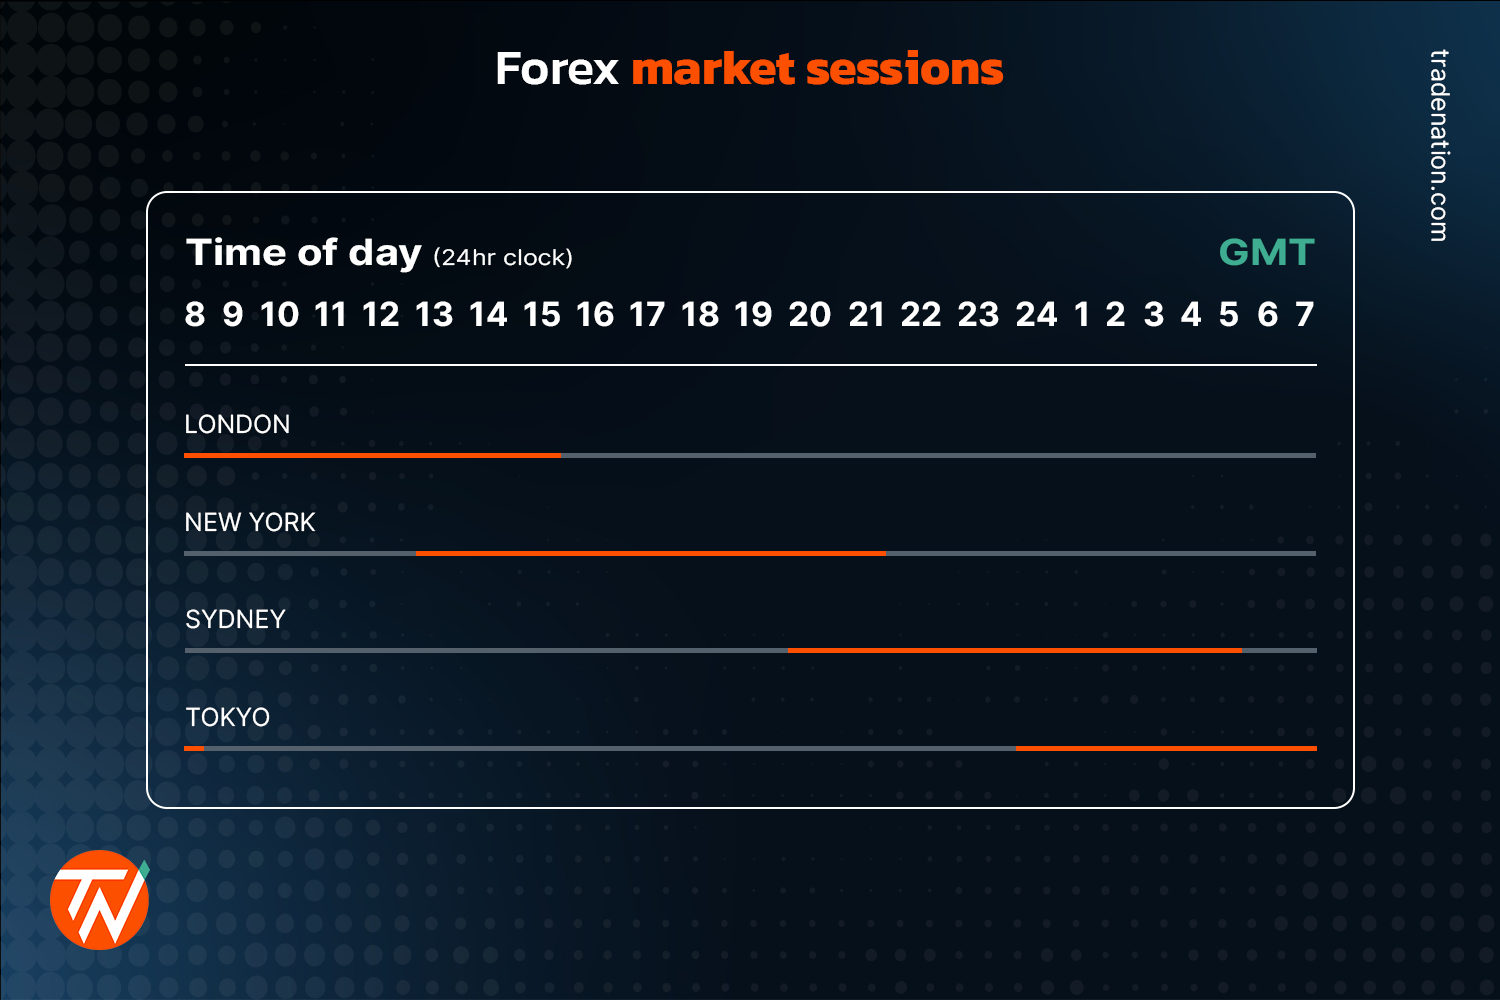 Table showing the time of day to indicate when the forex market opens in GMT. London, New York, Sydney and Tokyo